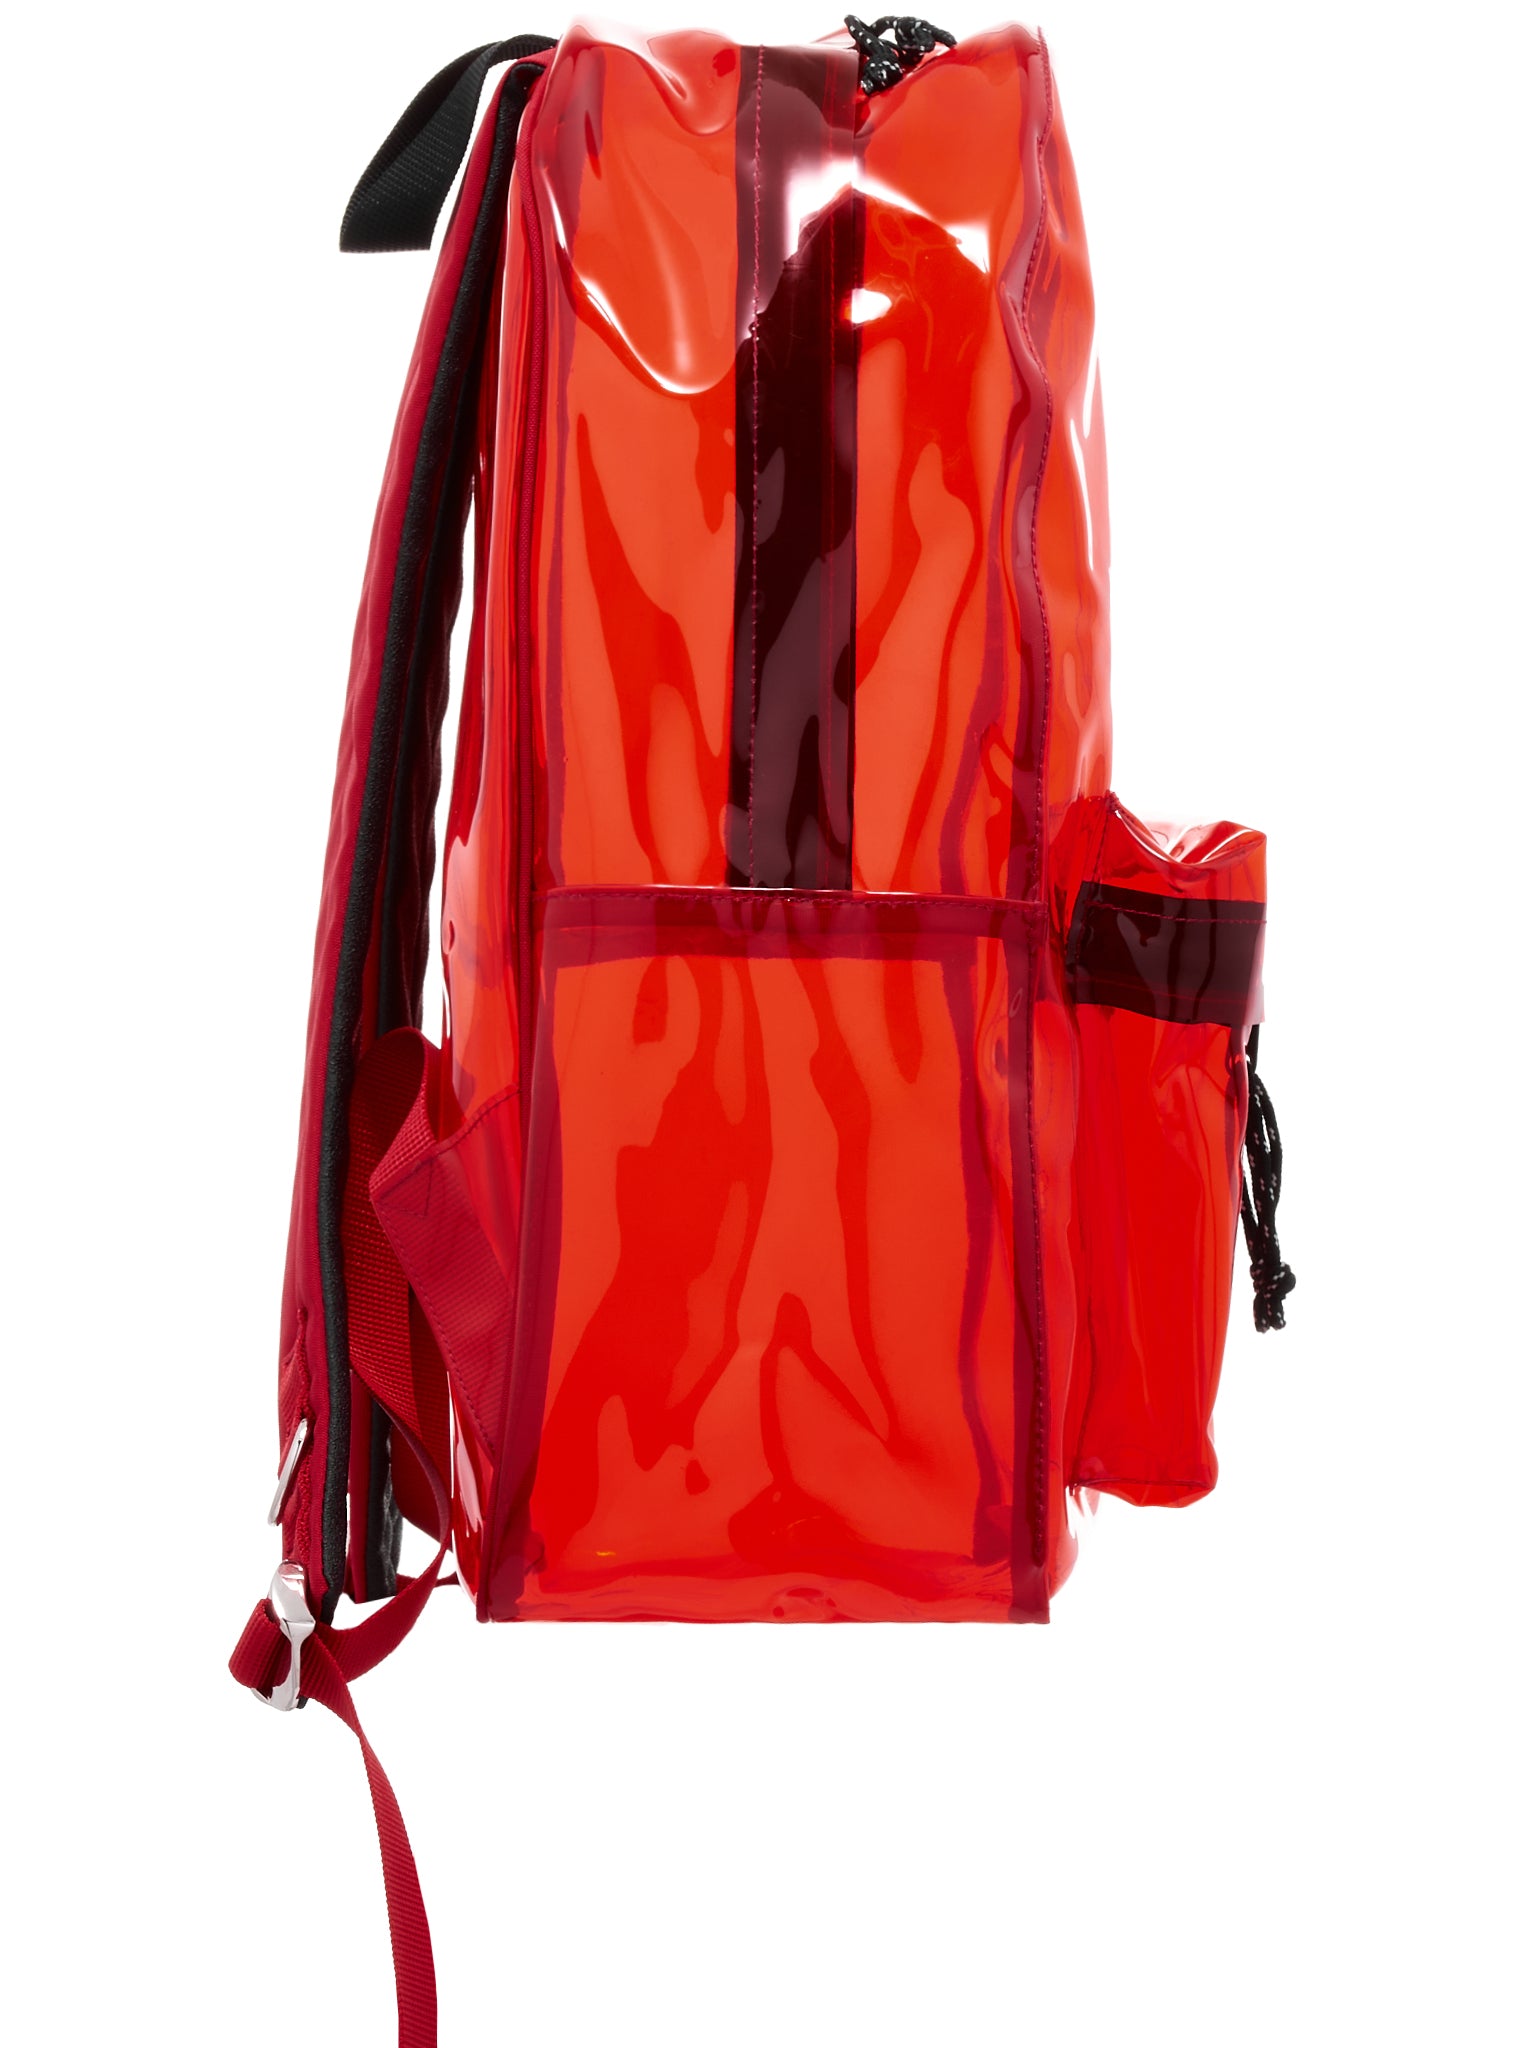 Jelly Backpack (UC2A4B01-RED)